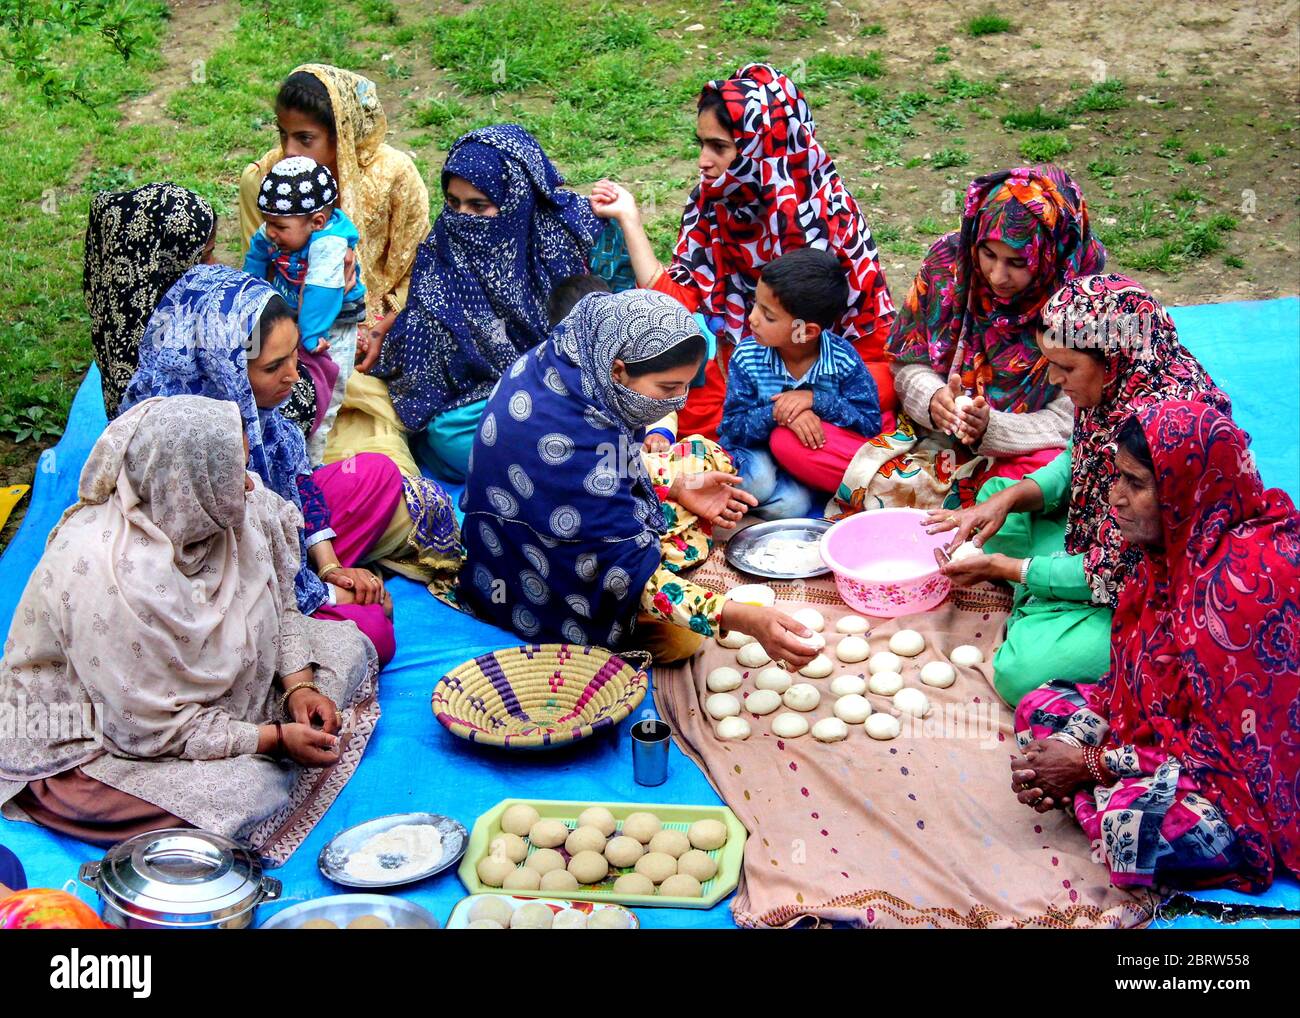 Pashtun community are busy preparing meals to break the fast during the holy month of Ramadan in a unique way on the outskirts of Anantnag District in Indian Administrated Kashmir. Before the Indian subcontinent was divided and the newly nations India and Pakistan came into existence this community used to come for trade. Many of them settled in Kashmir. The Pashtuns of Kashmir have their ancestral roots in Pakistan and Afghanistan. They have been living in Kashmir since more than a decade. There are about 80 thousand people of this community in different areas of Kashmir and we traveled to t Stock Photo